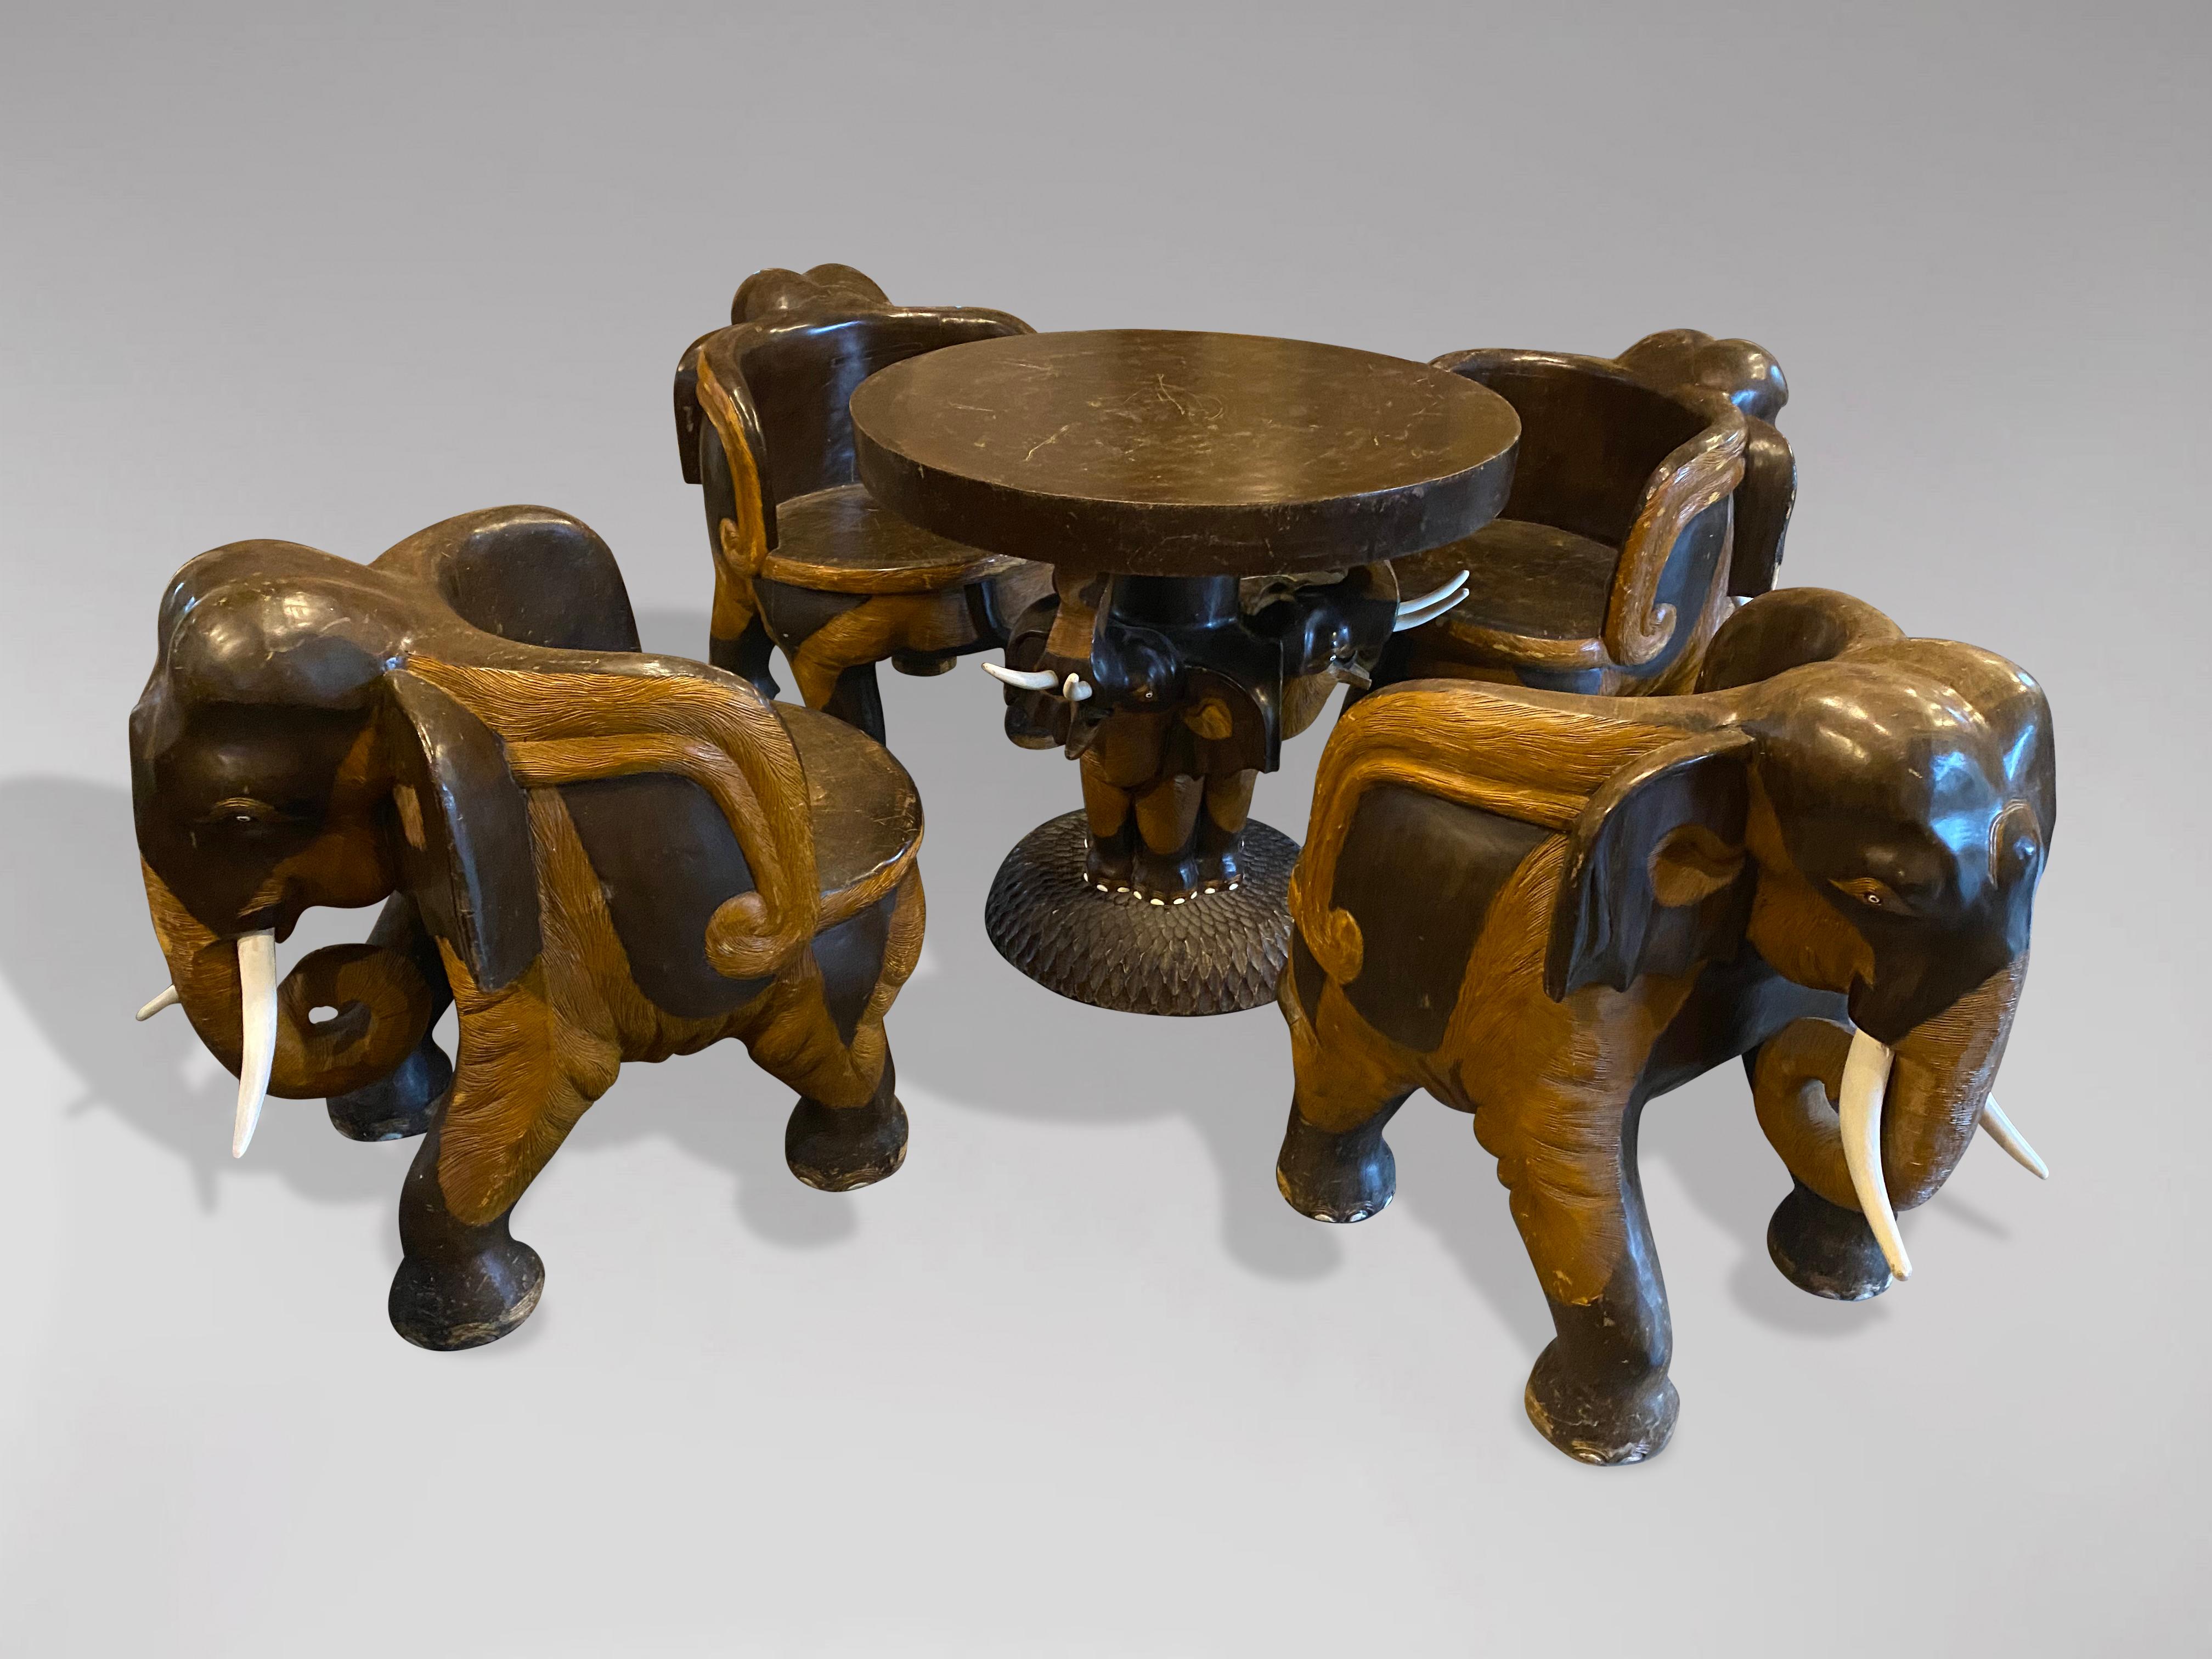 A stunning mid 20th century Anglo Indian vintage hand carved hardwood living room set. Comprising a set of 4 tub armchairs and a circular table, hand carved and modelled as a standing elephant. Each chair is hand carved from a single piece of